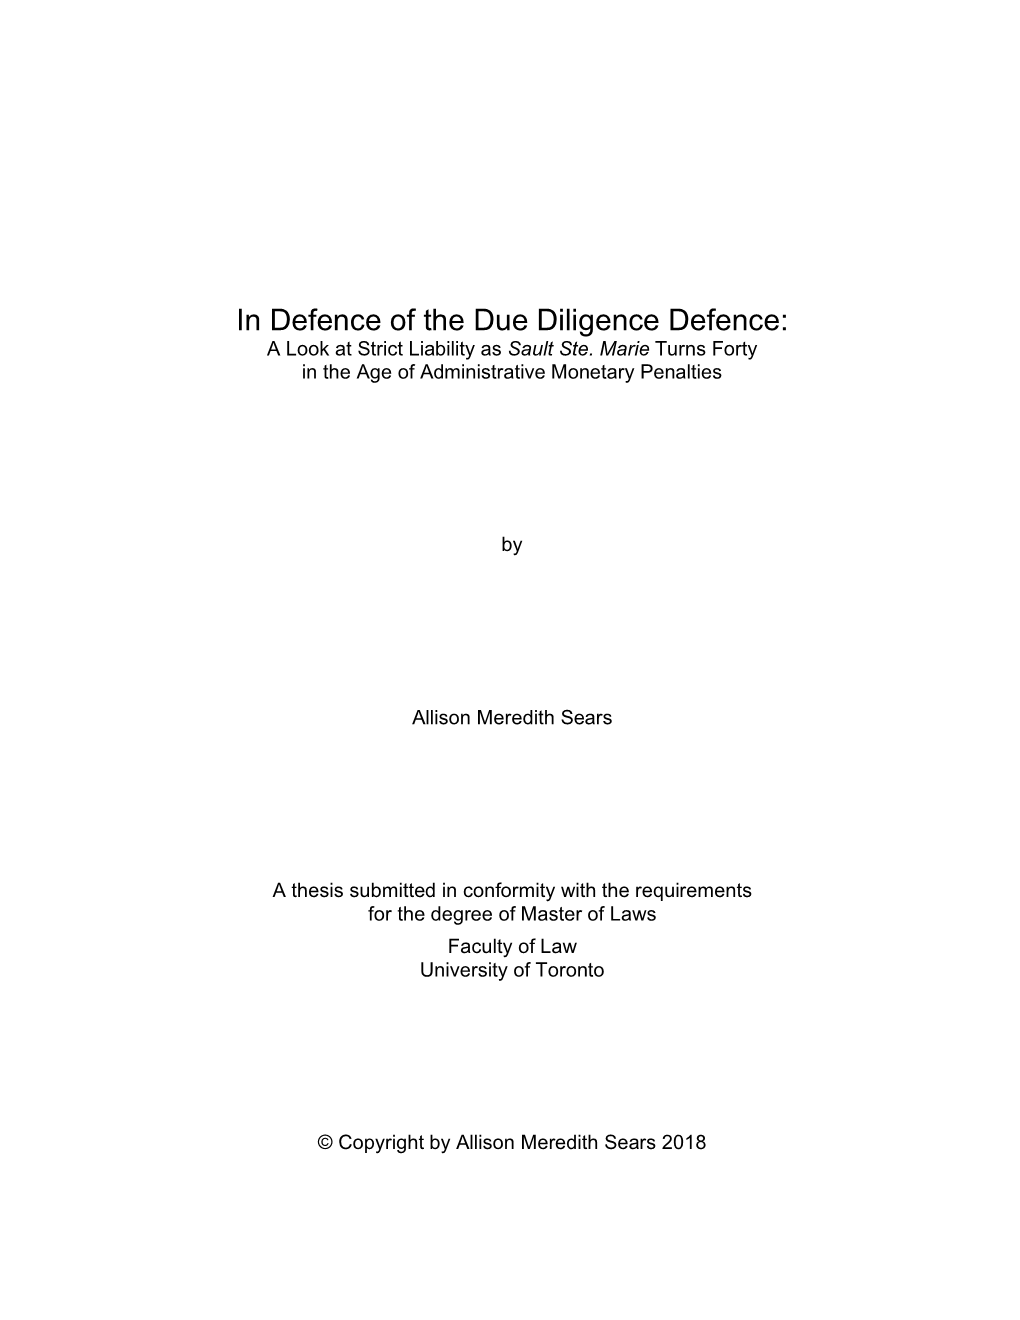 In Defence of the Due Diligence Defence: a Look at Strict Liability As Sault Ste